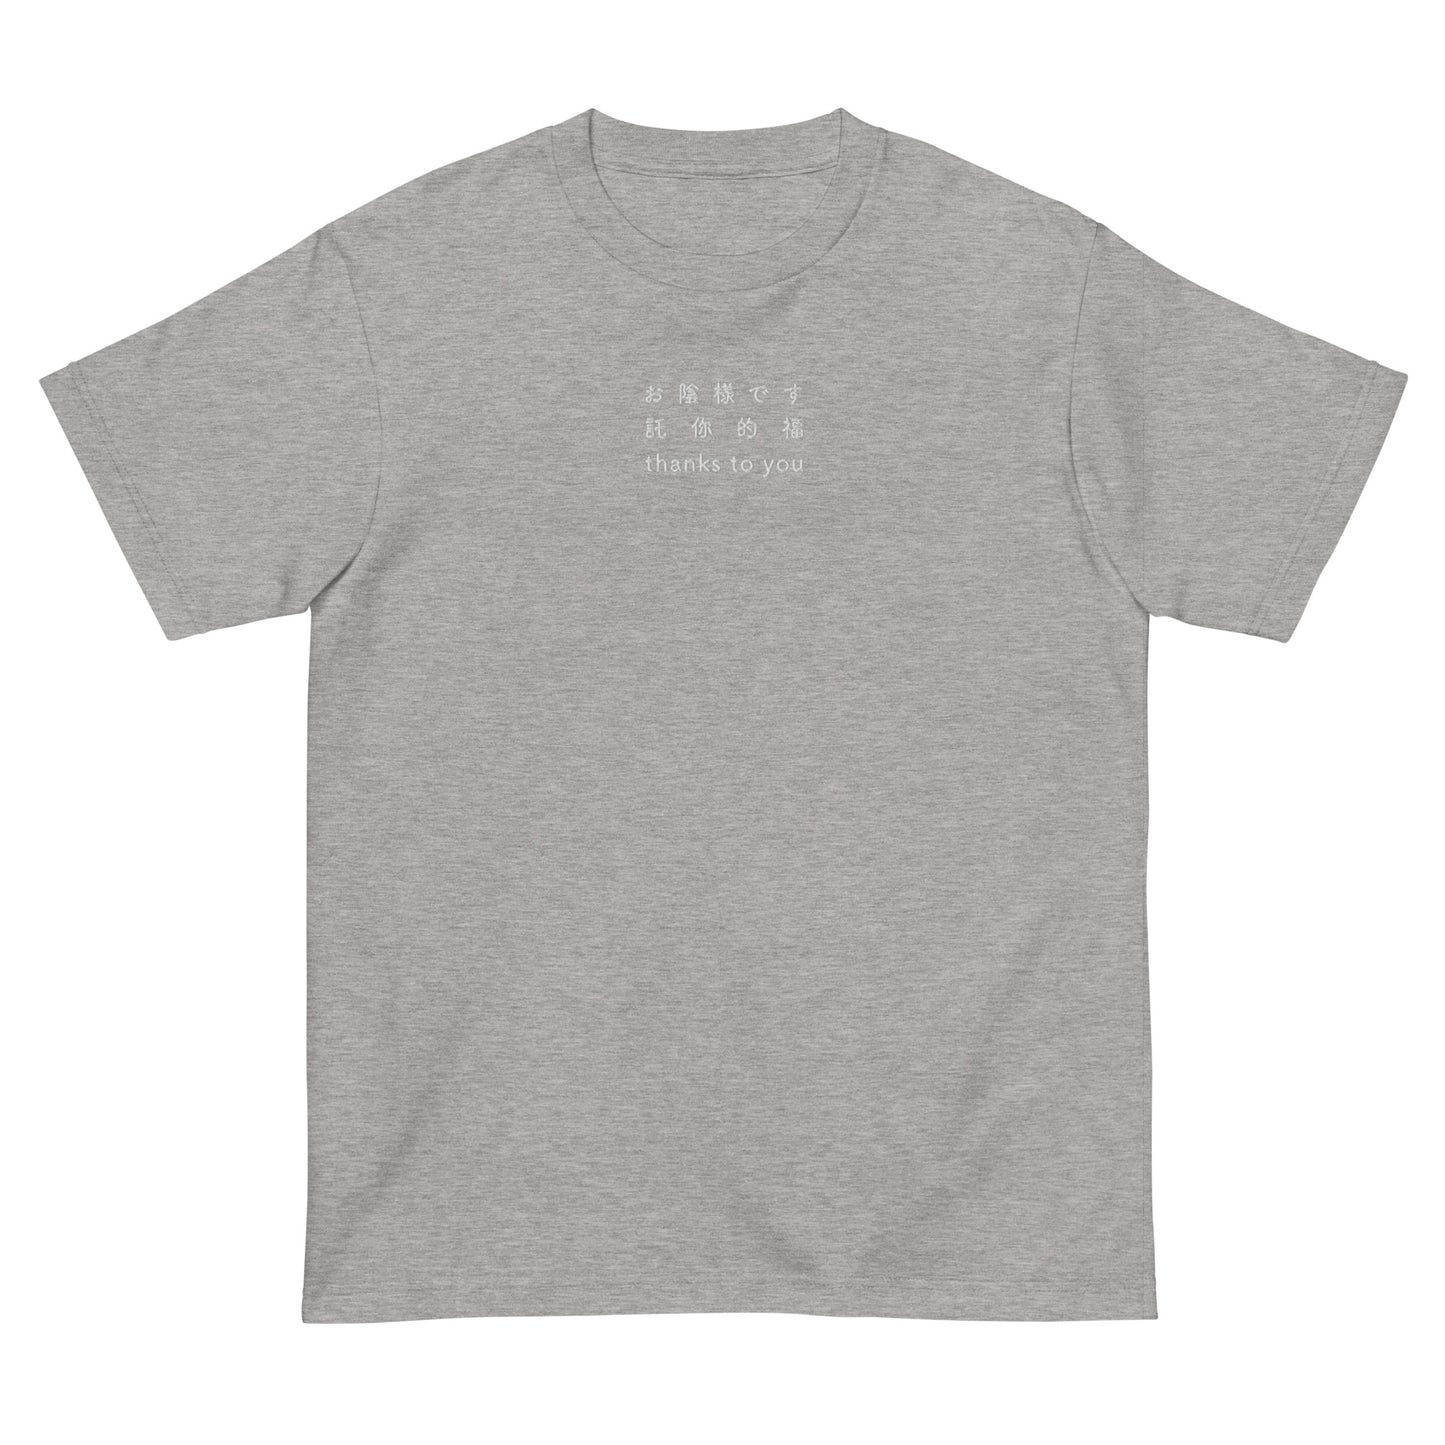 Light Gray High Quality Tee - Front Design with an white Embroidery "thanks to you" in Japanese,Chinese and English